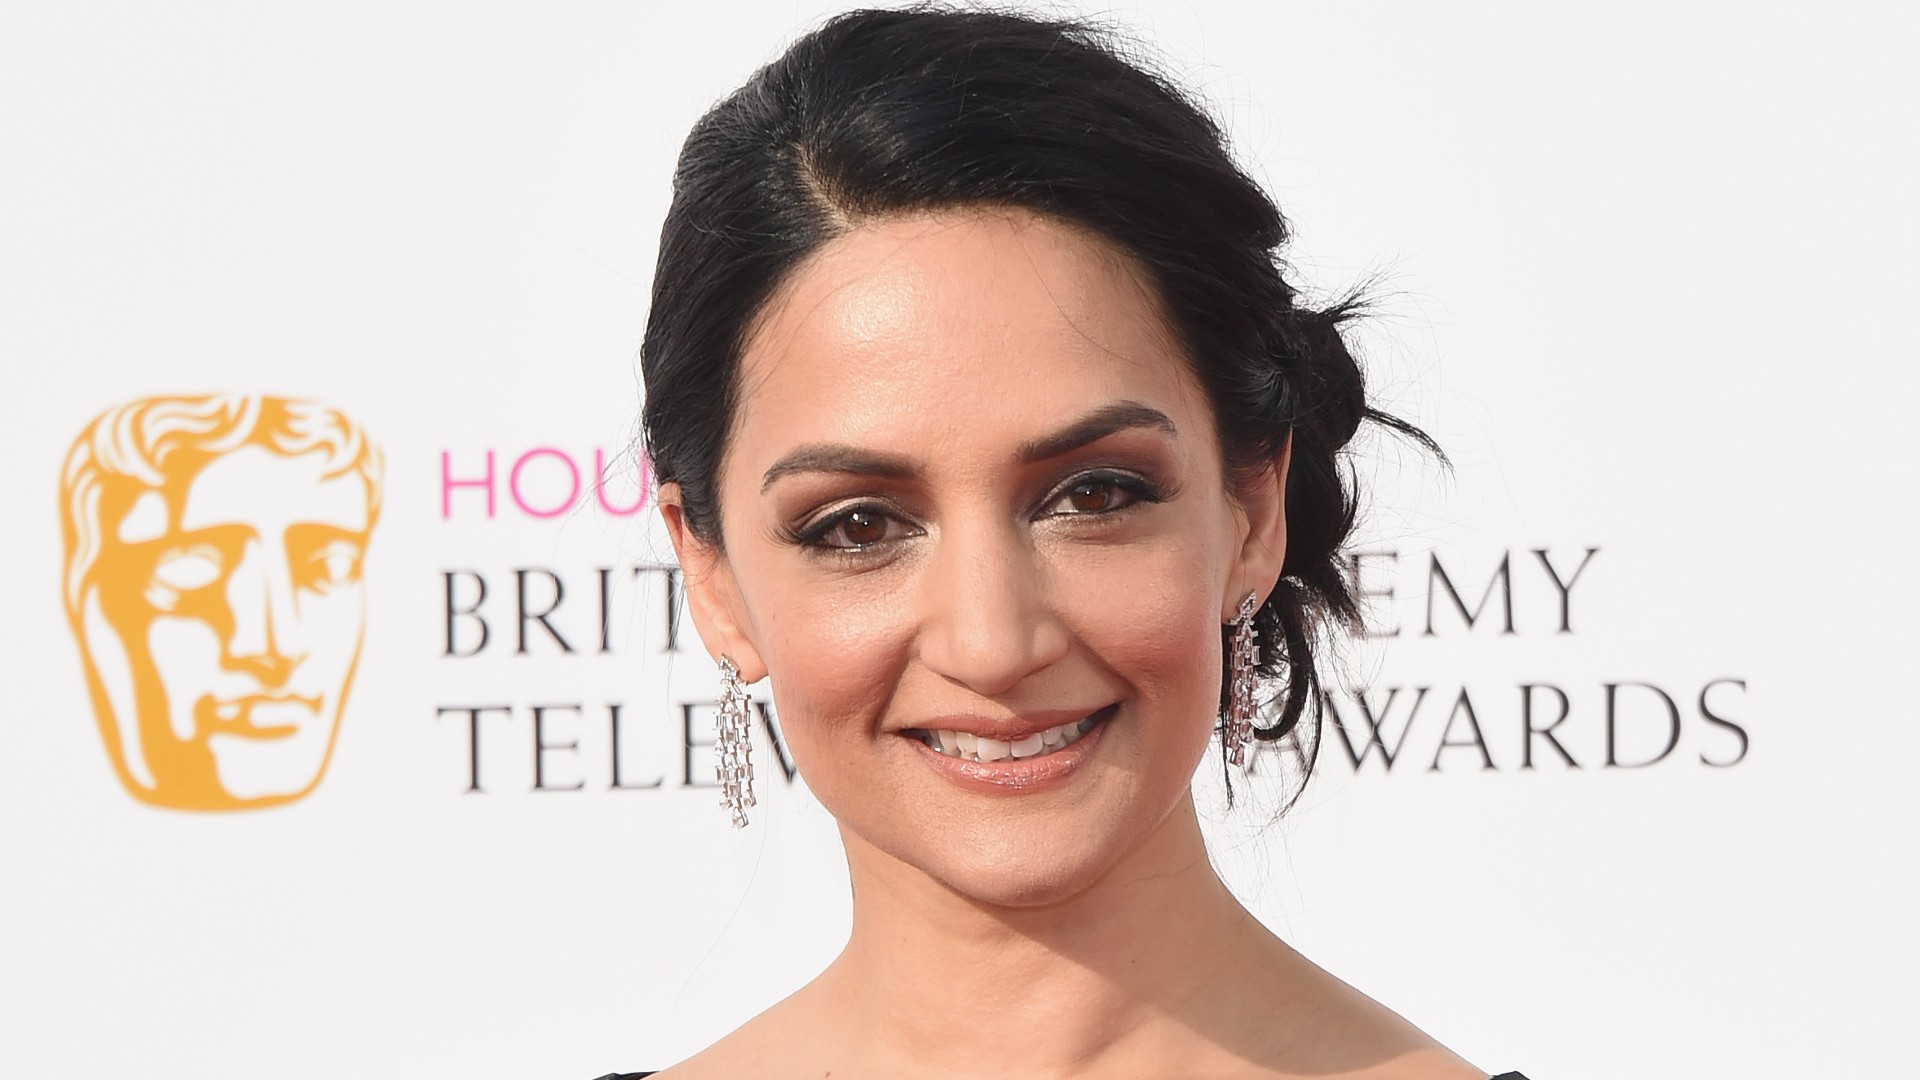 10 Things You May Not Know About Archie Panjabi